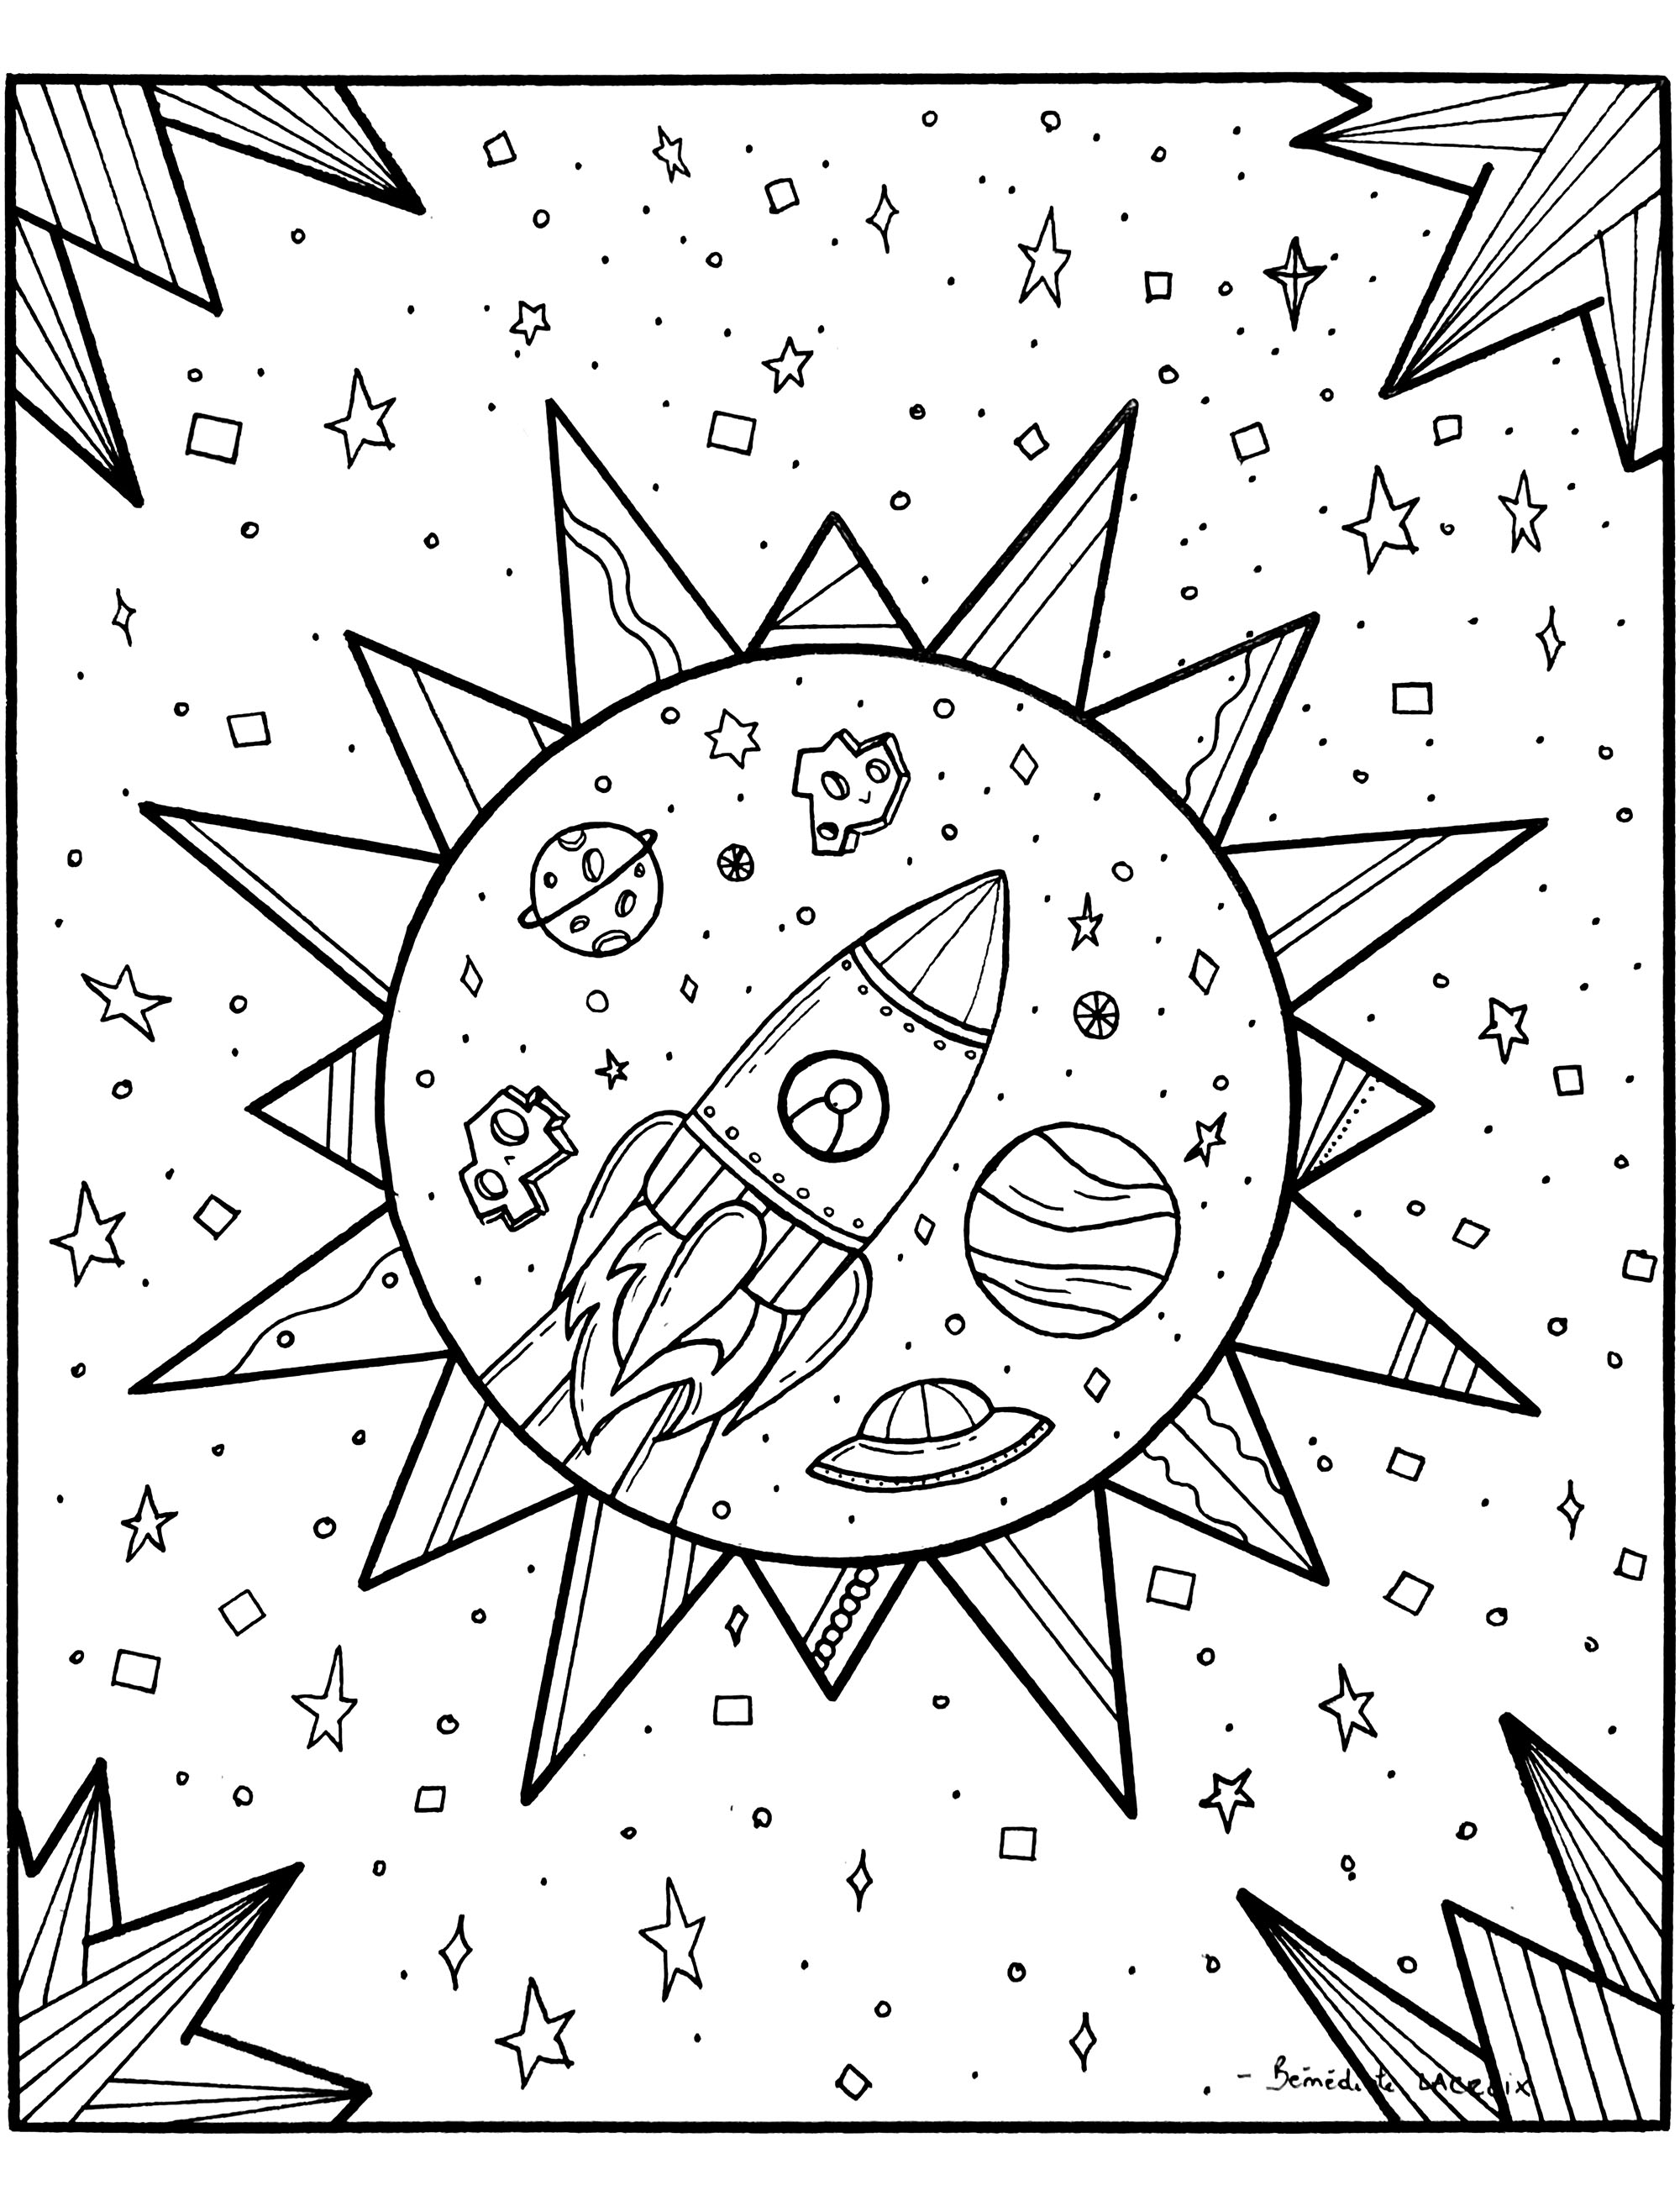 This rocket travels the galaxy's interstellar space. Color the planets, meteorites, shuttles and stars it encounters along the way, Artist : Bénédicte